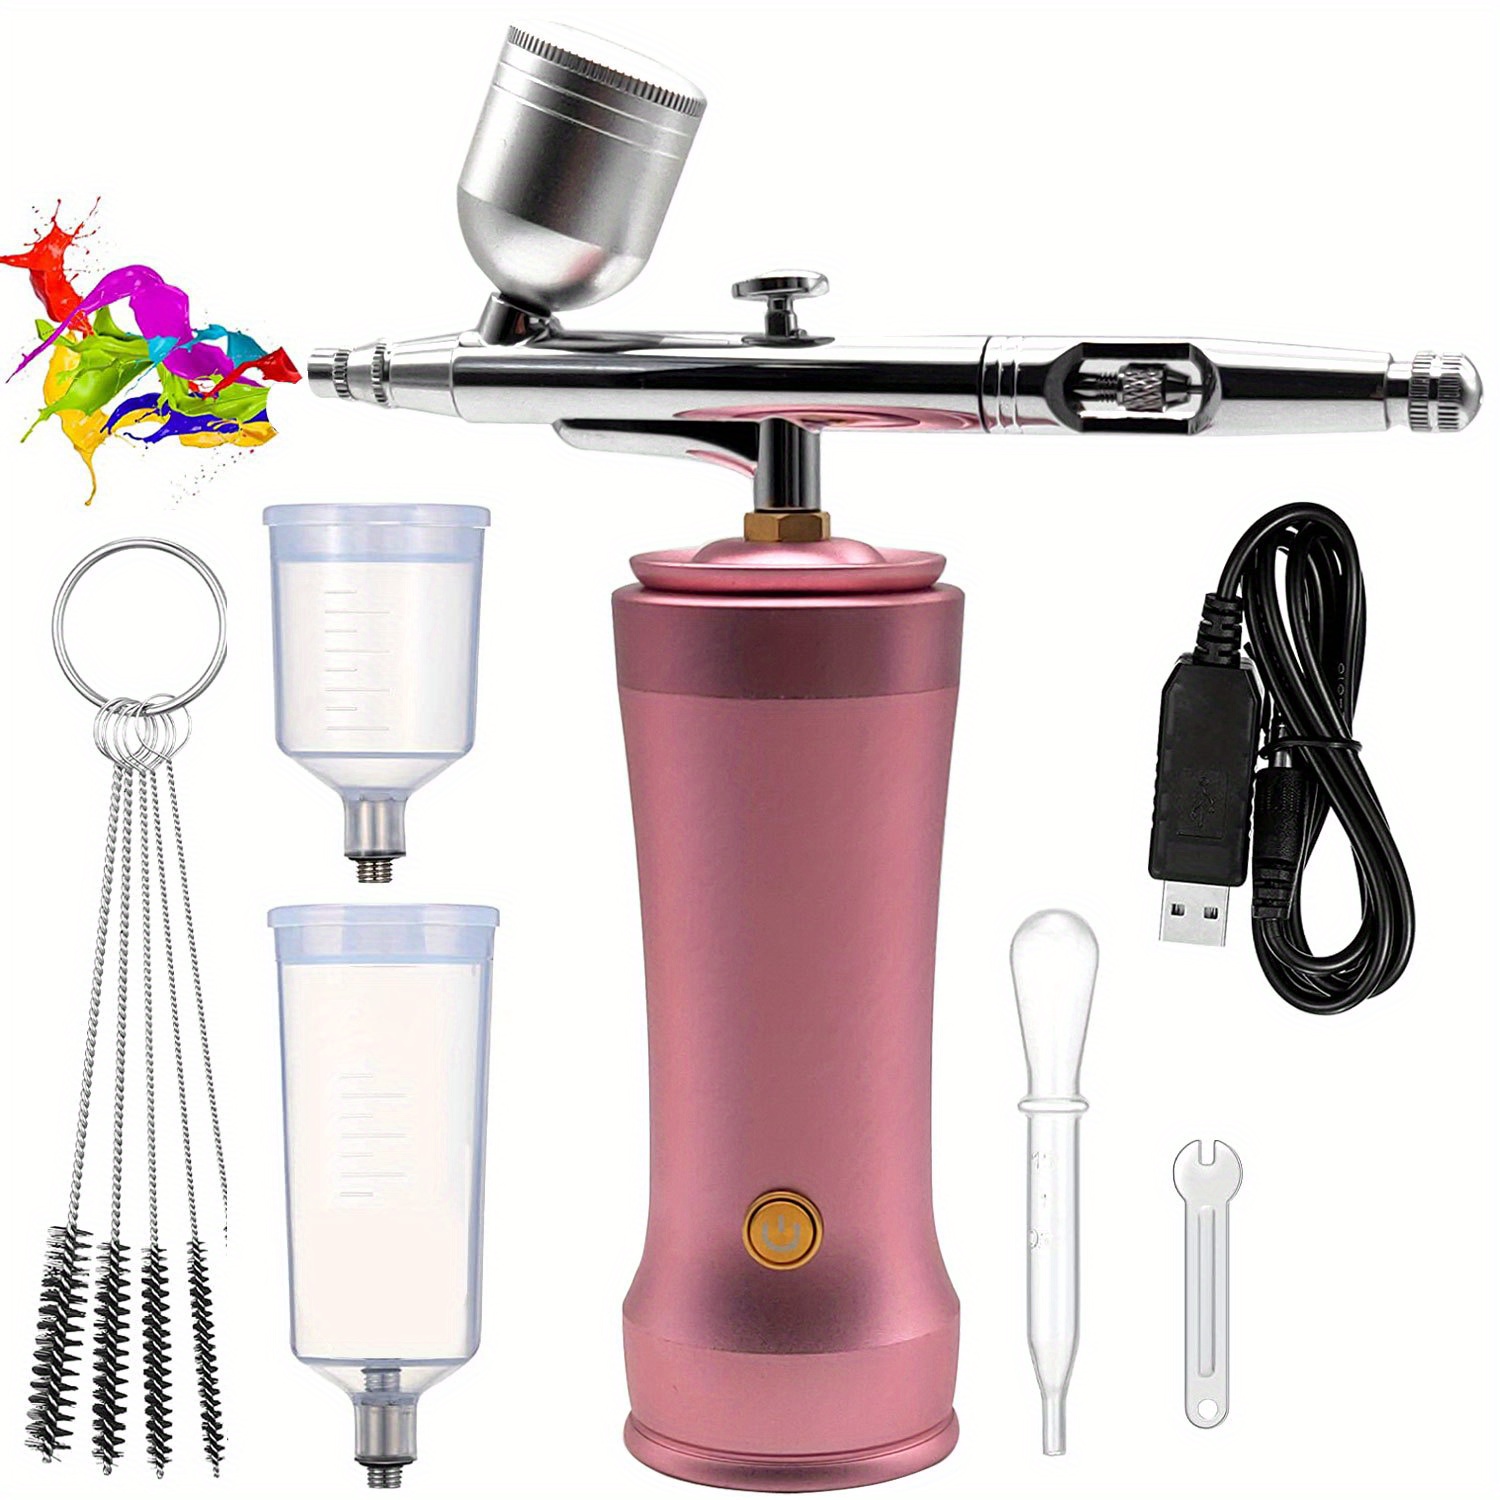  SEVIBT Airbrush Kit - Rechargeable Handheld Airbrush  Compressor, Professional Cordless auto Airbrush Gun, Airbrush Set Portable  Wireless Air Brush for Nail Art,Makeup, Barber,Cake Decor and Painting :  Arts, Crafts & Sewing